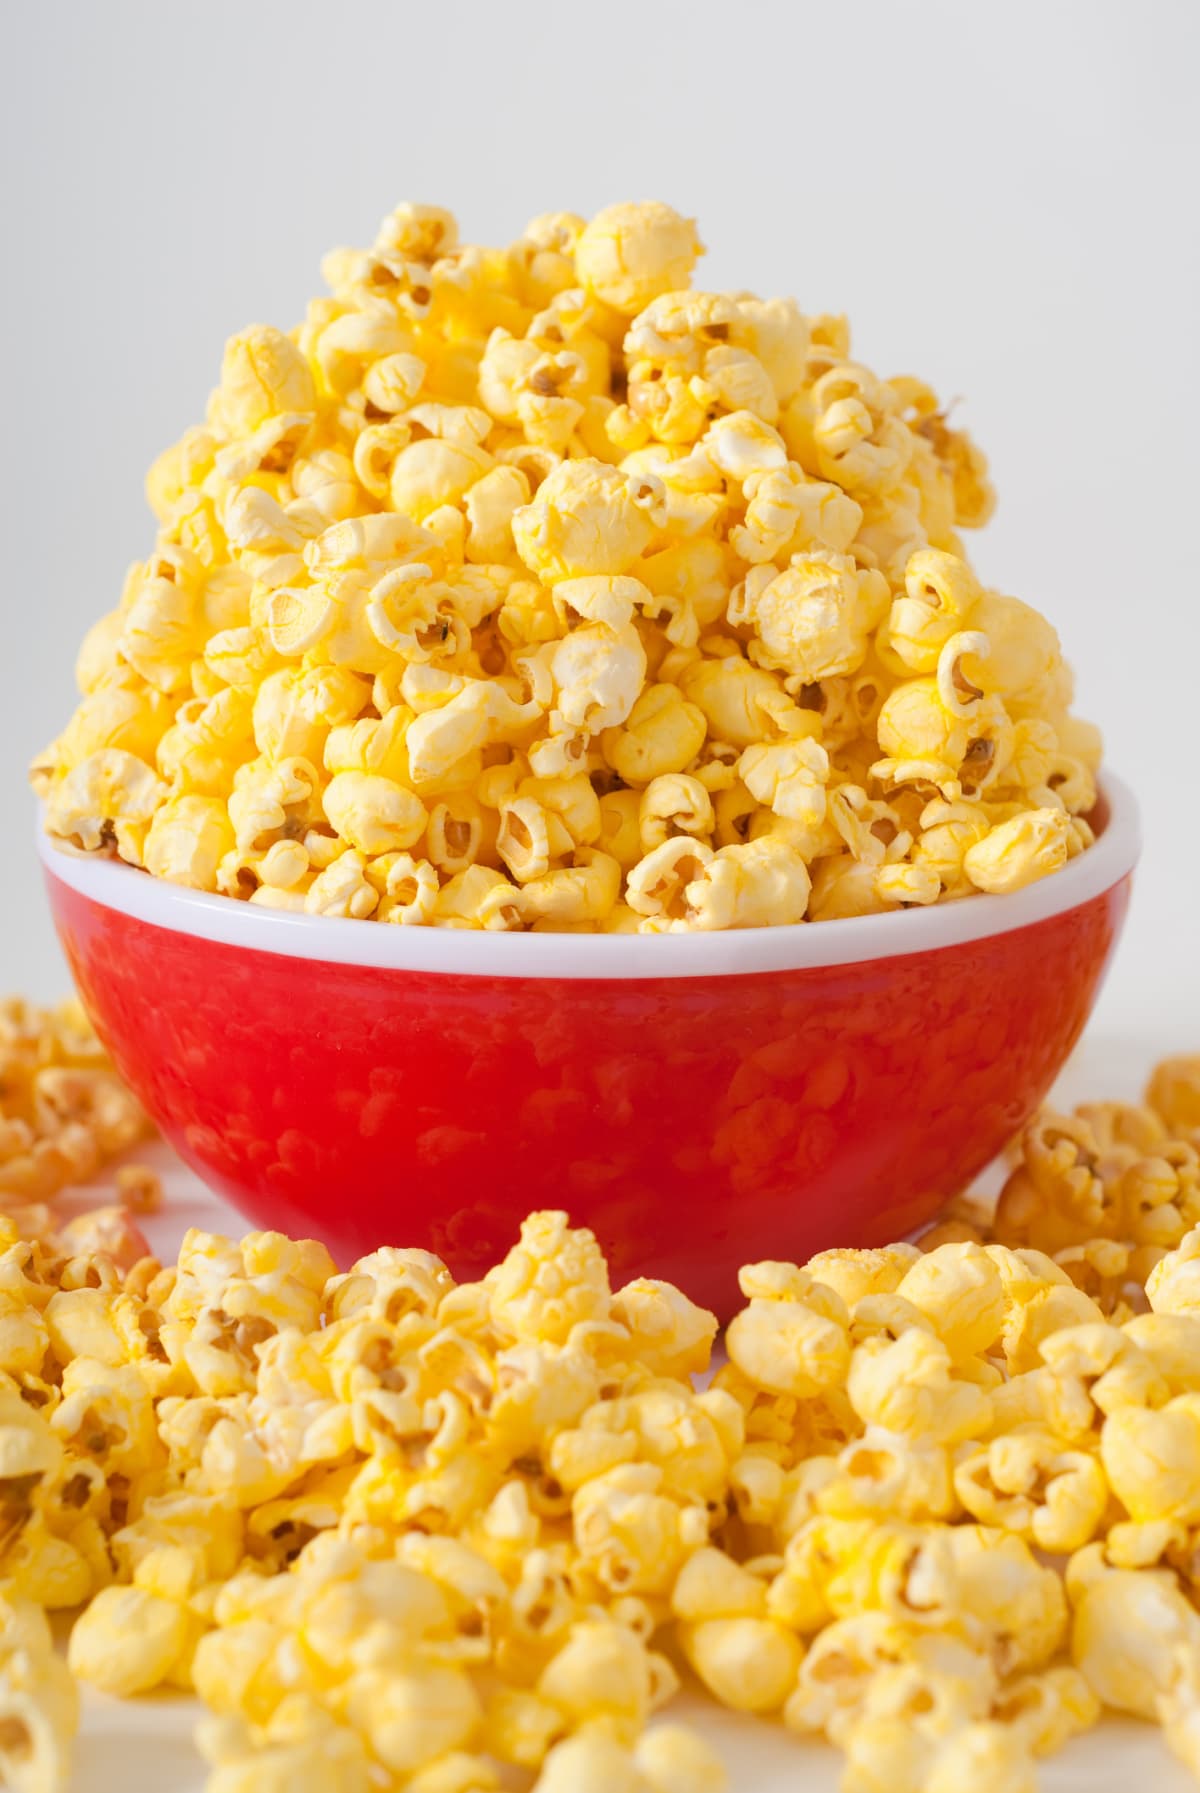 Popcorn piled high in a white and red bowl on a white surface with popcorn all around